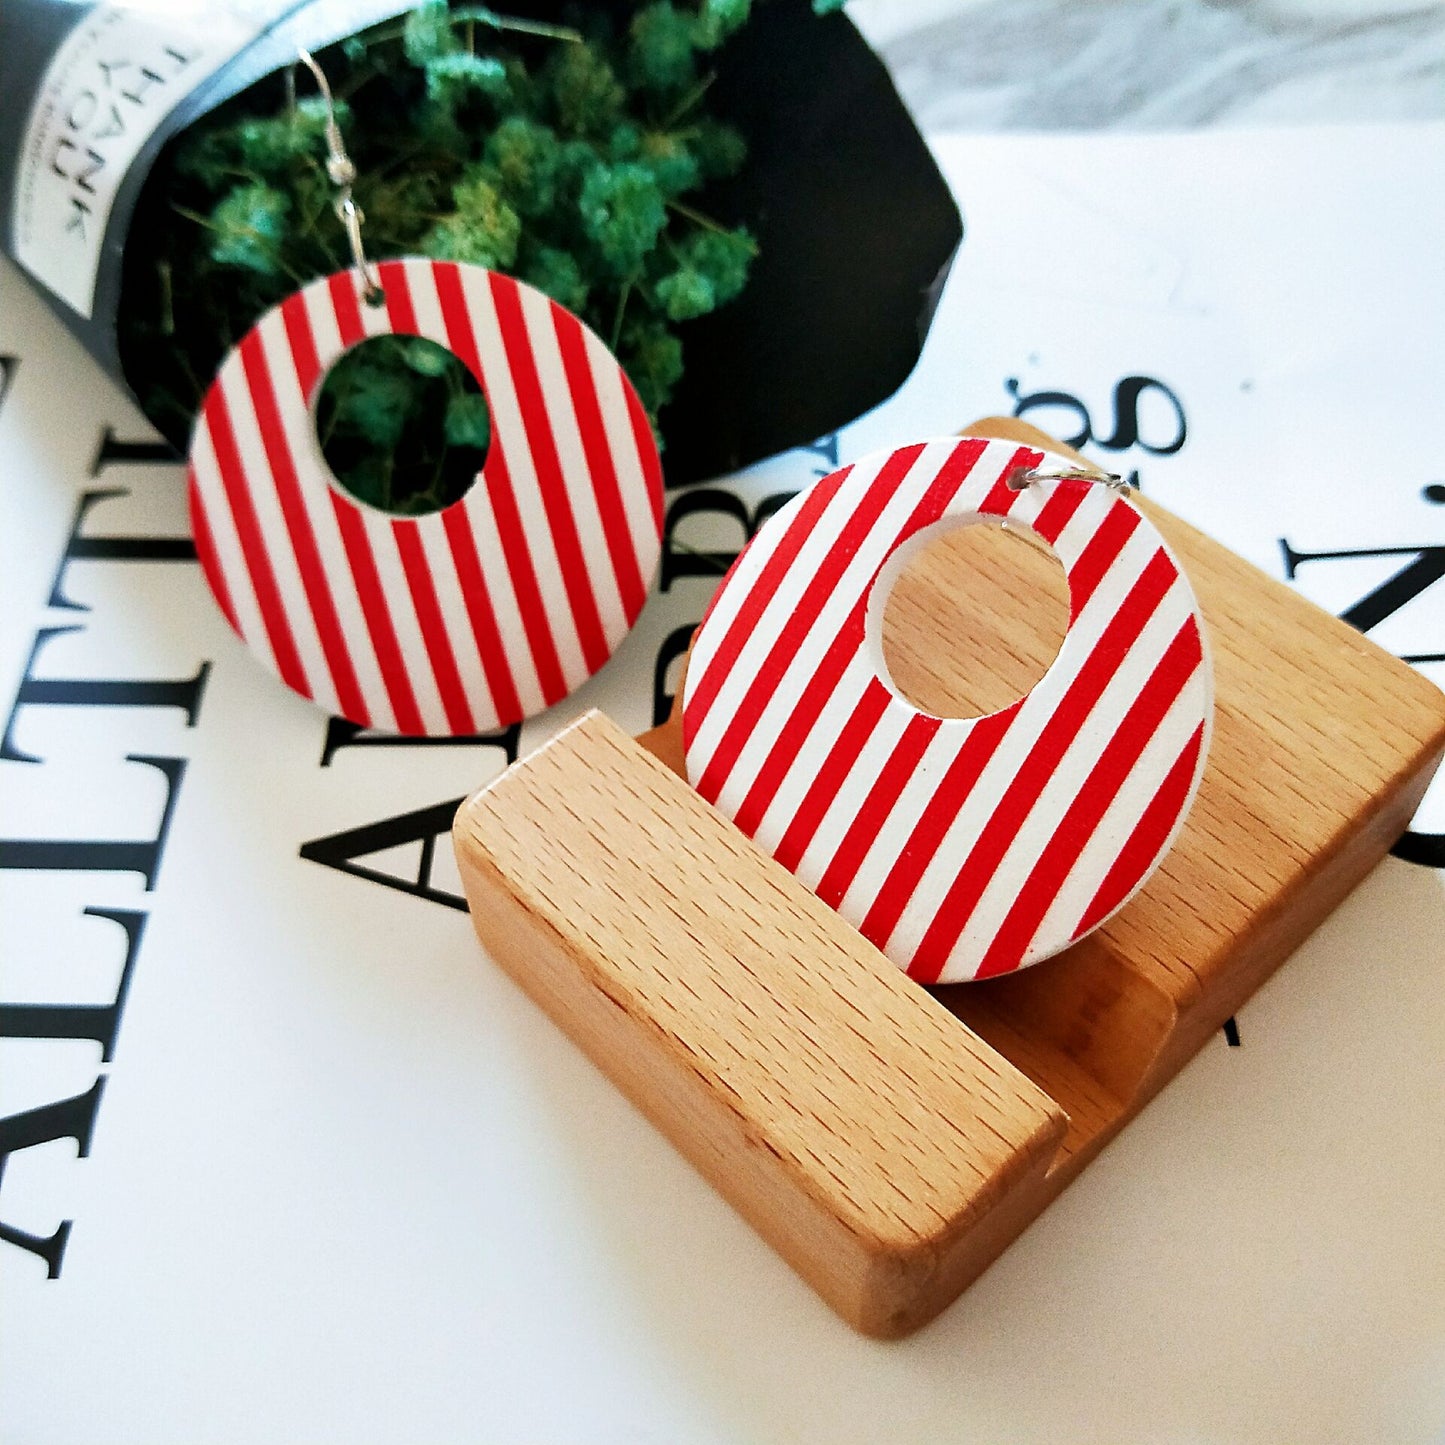 Round Printed Hollow Wooden Earrings South Korea